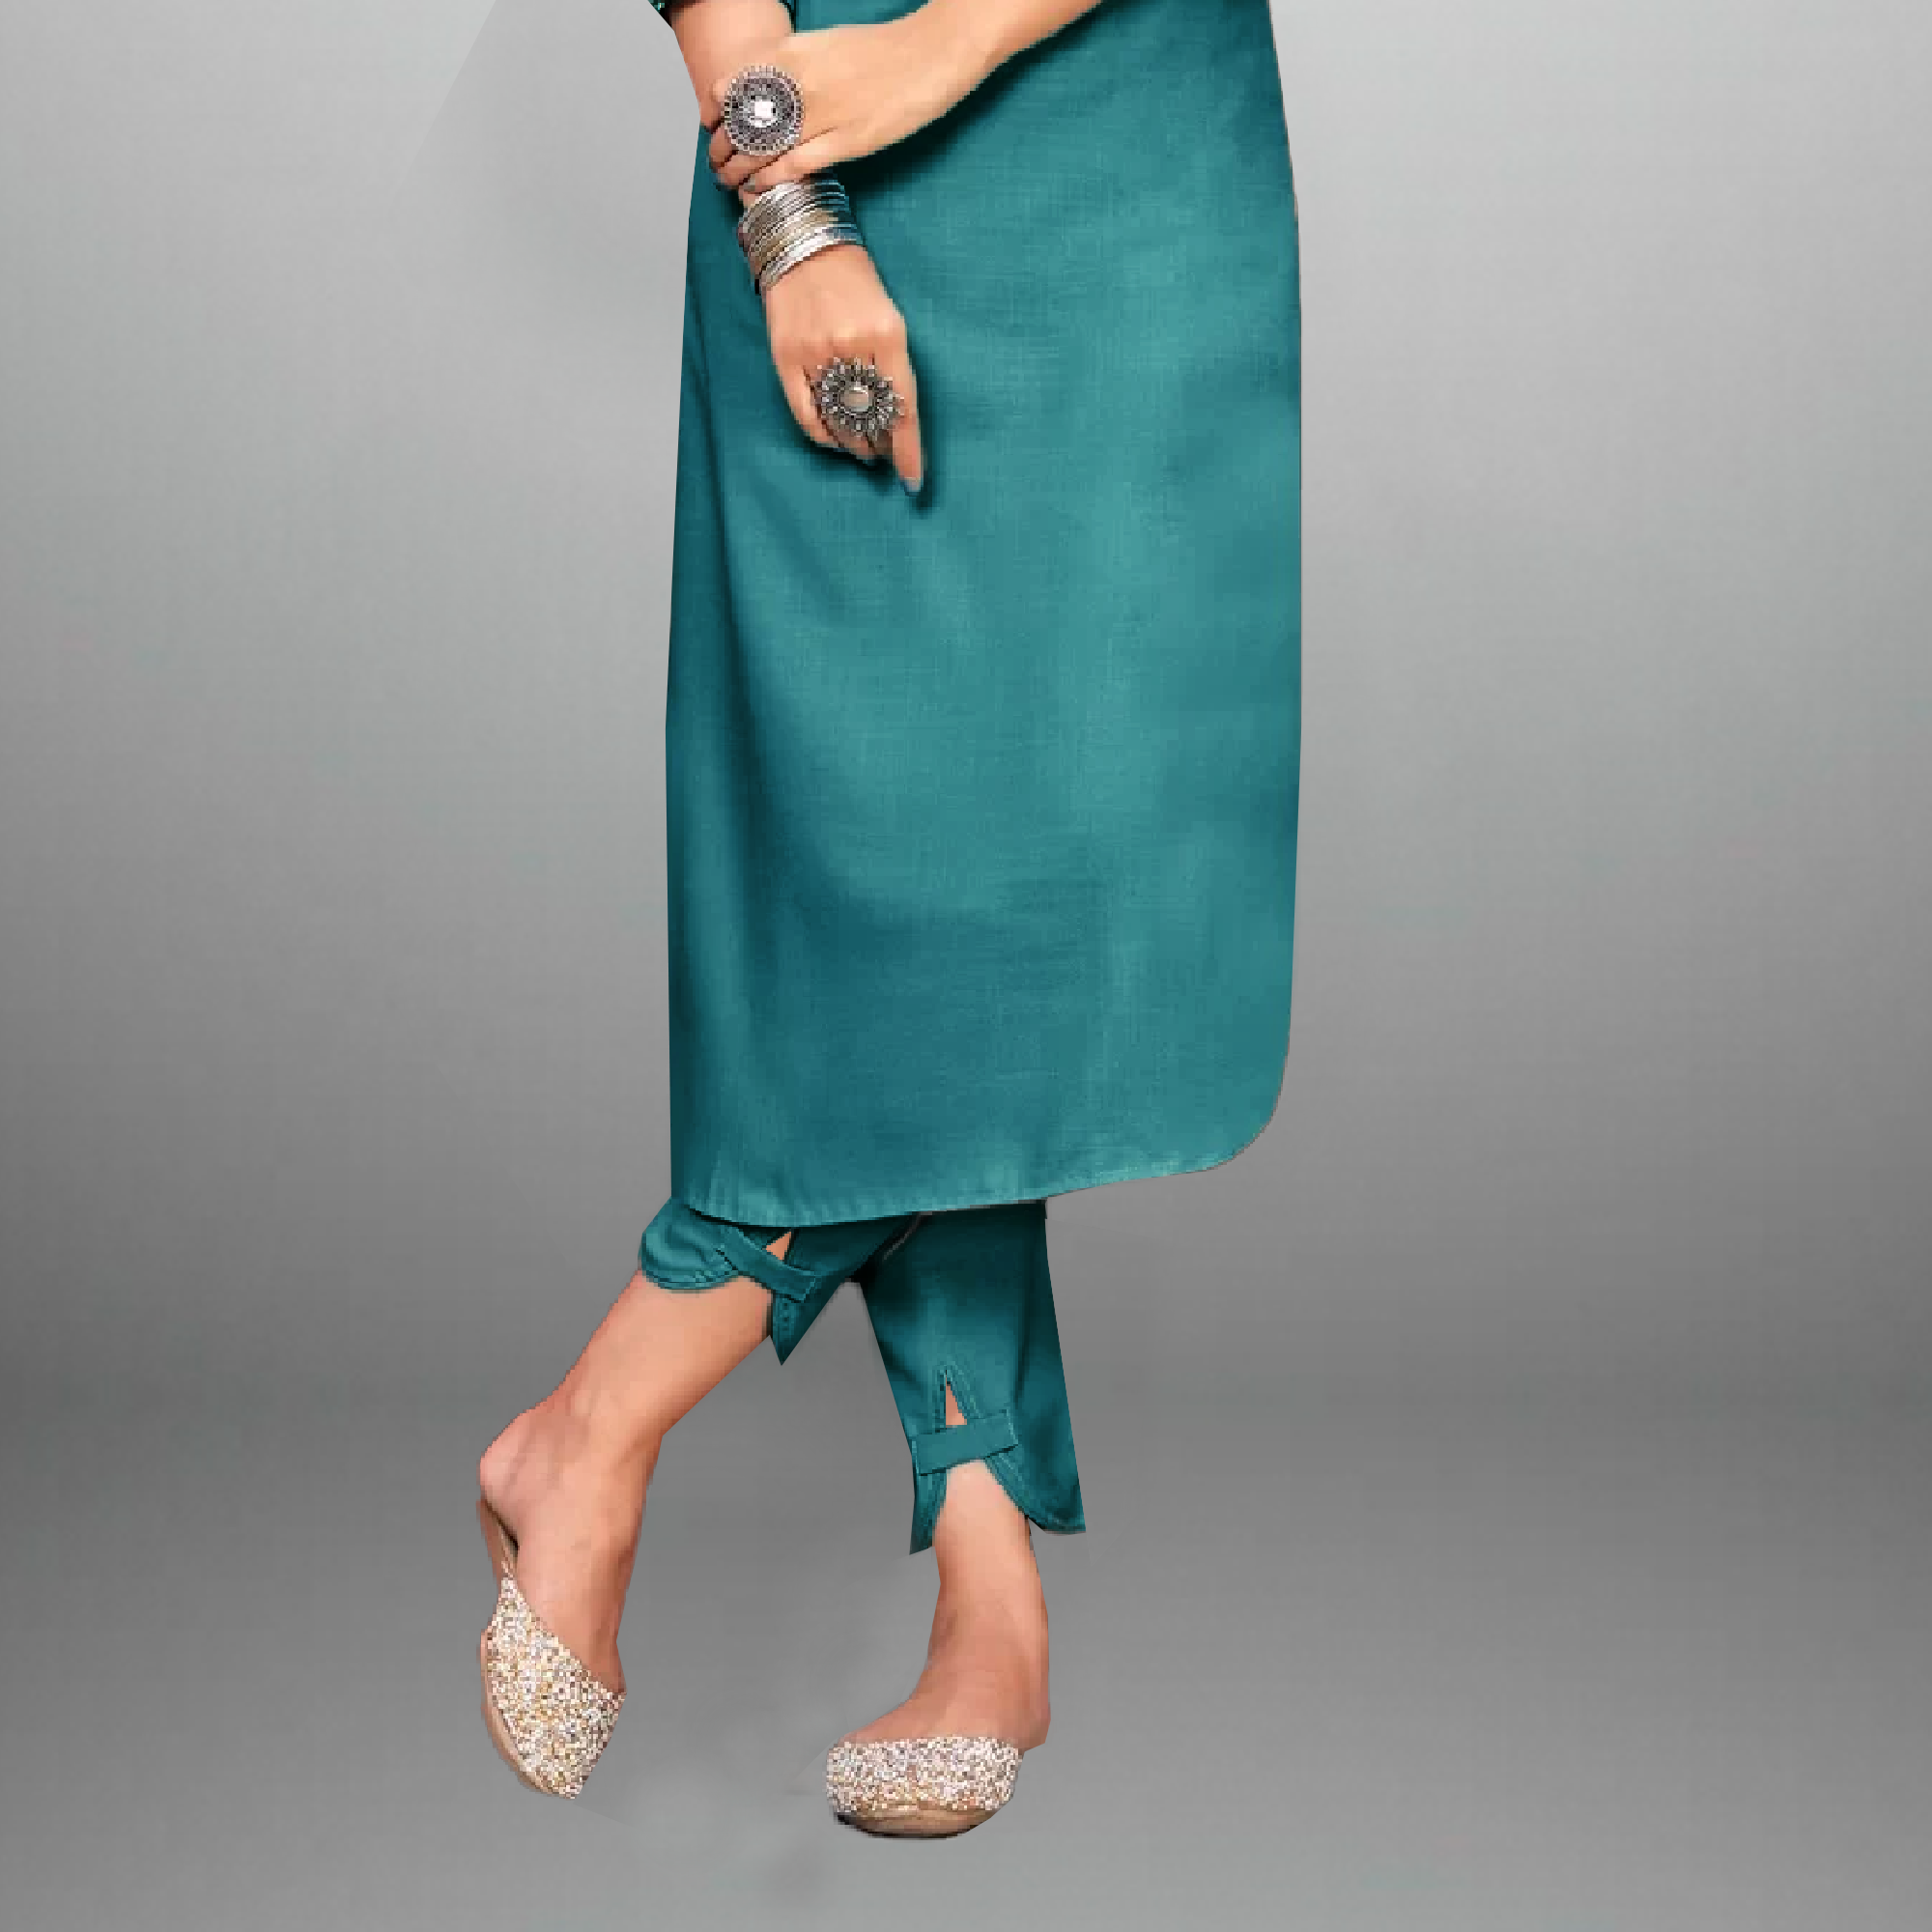 Women's Teal blue kurti set with printed patch work on it-RWKS001